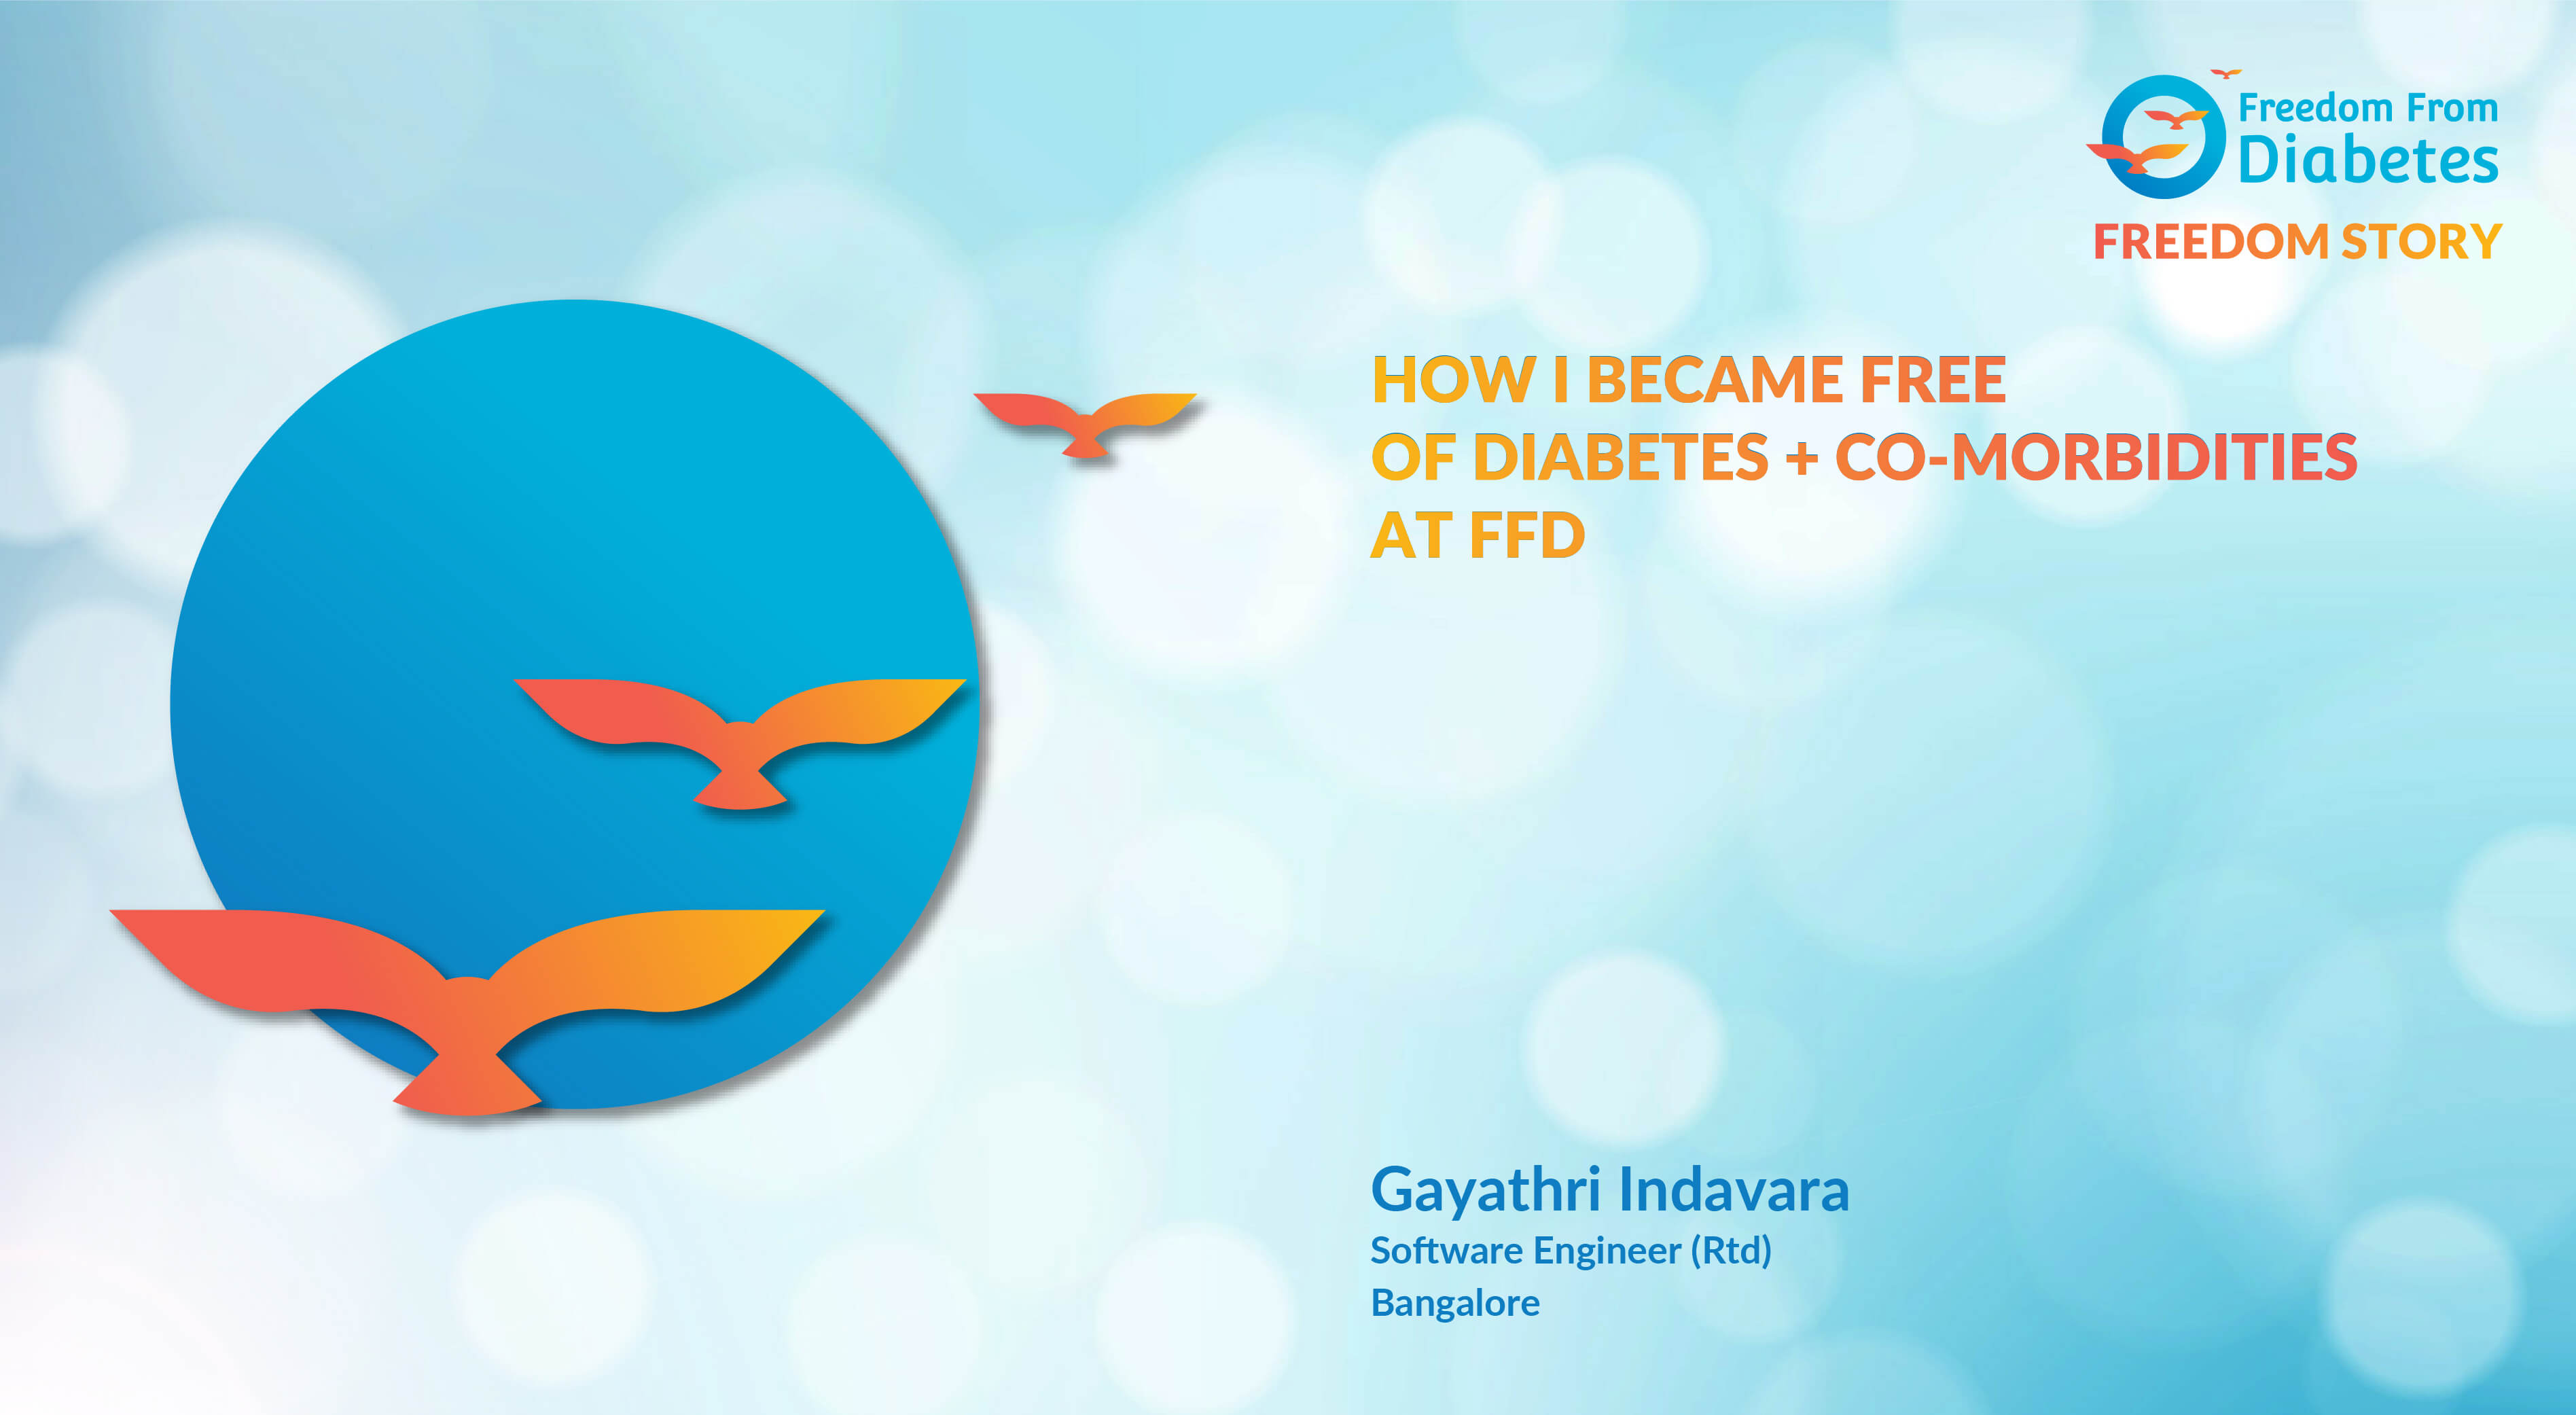 How I became free of diabetes and co-morbidities